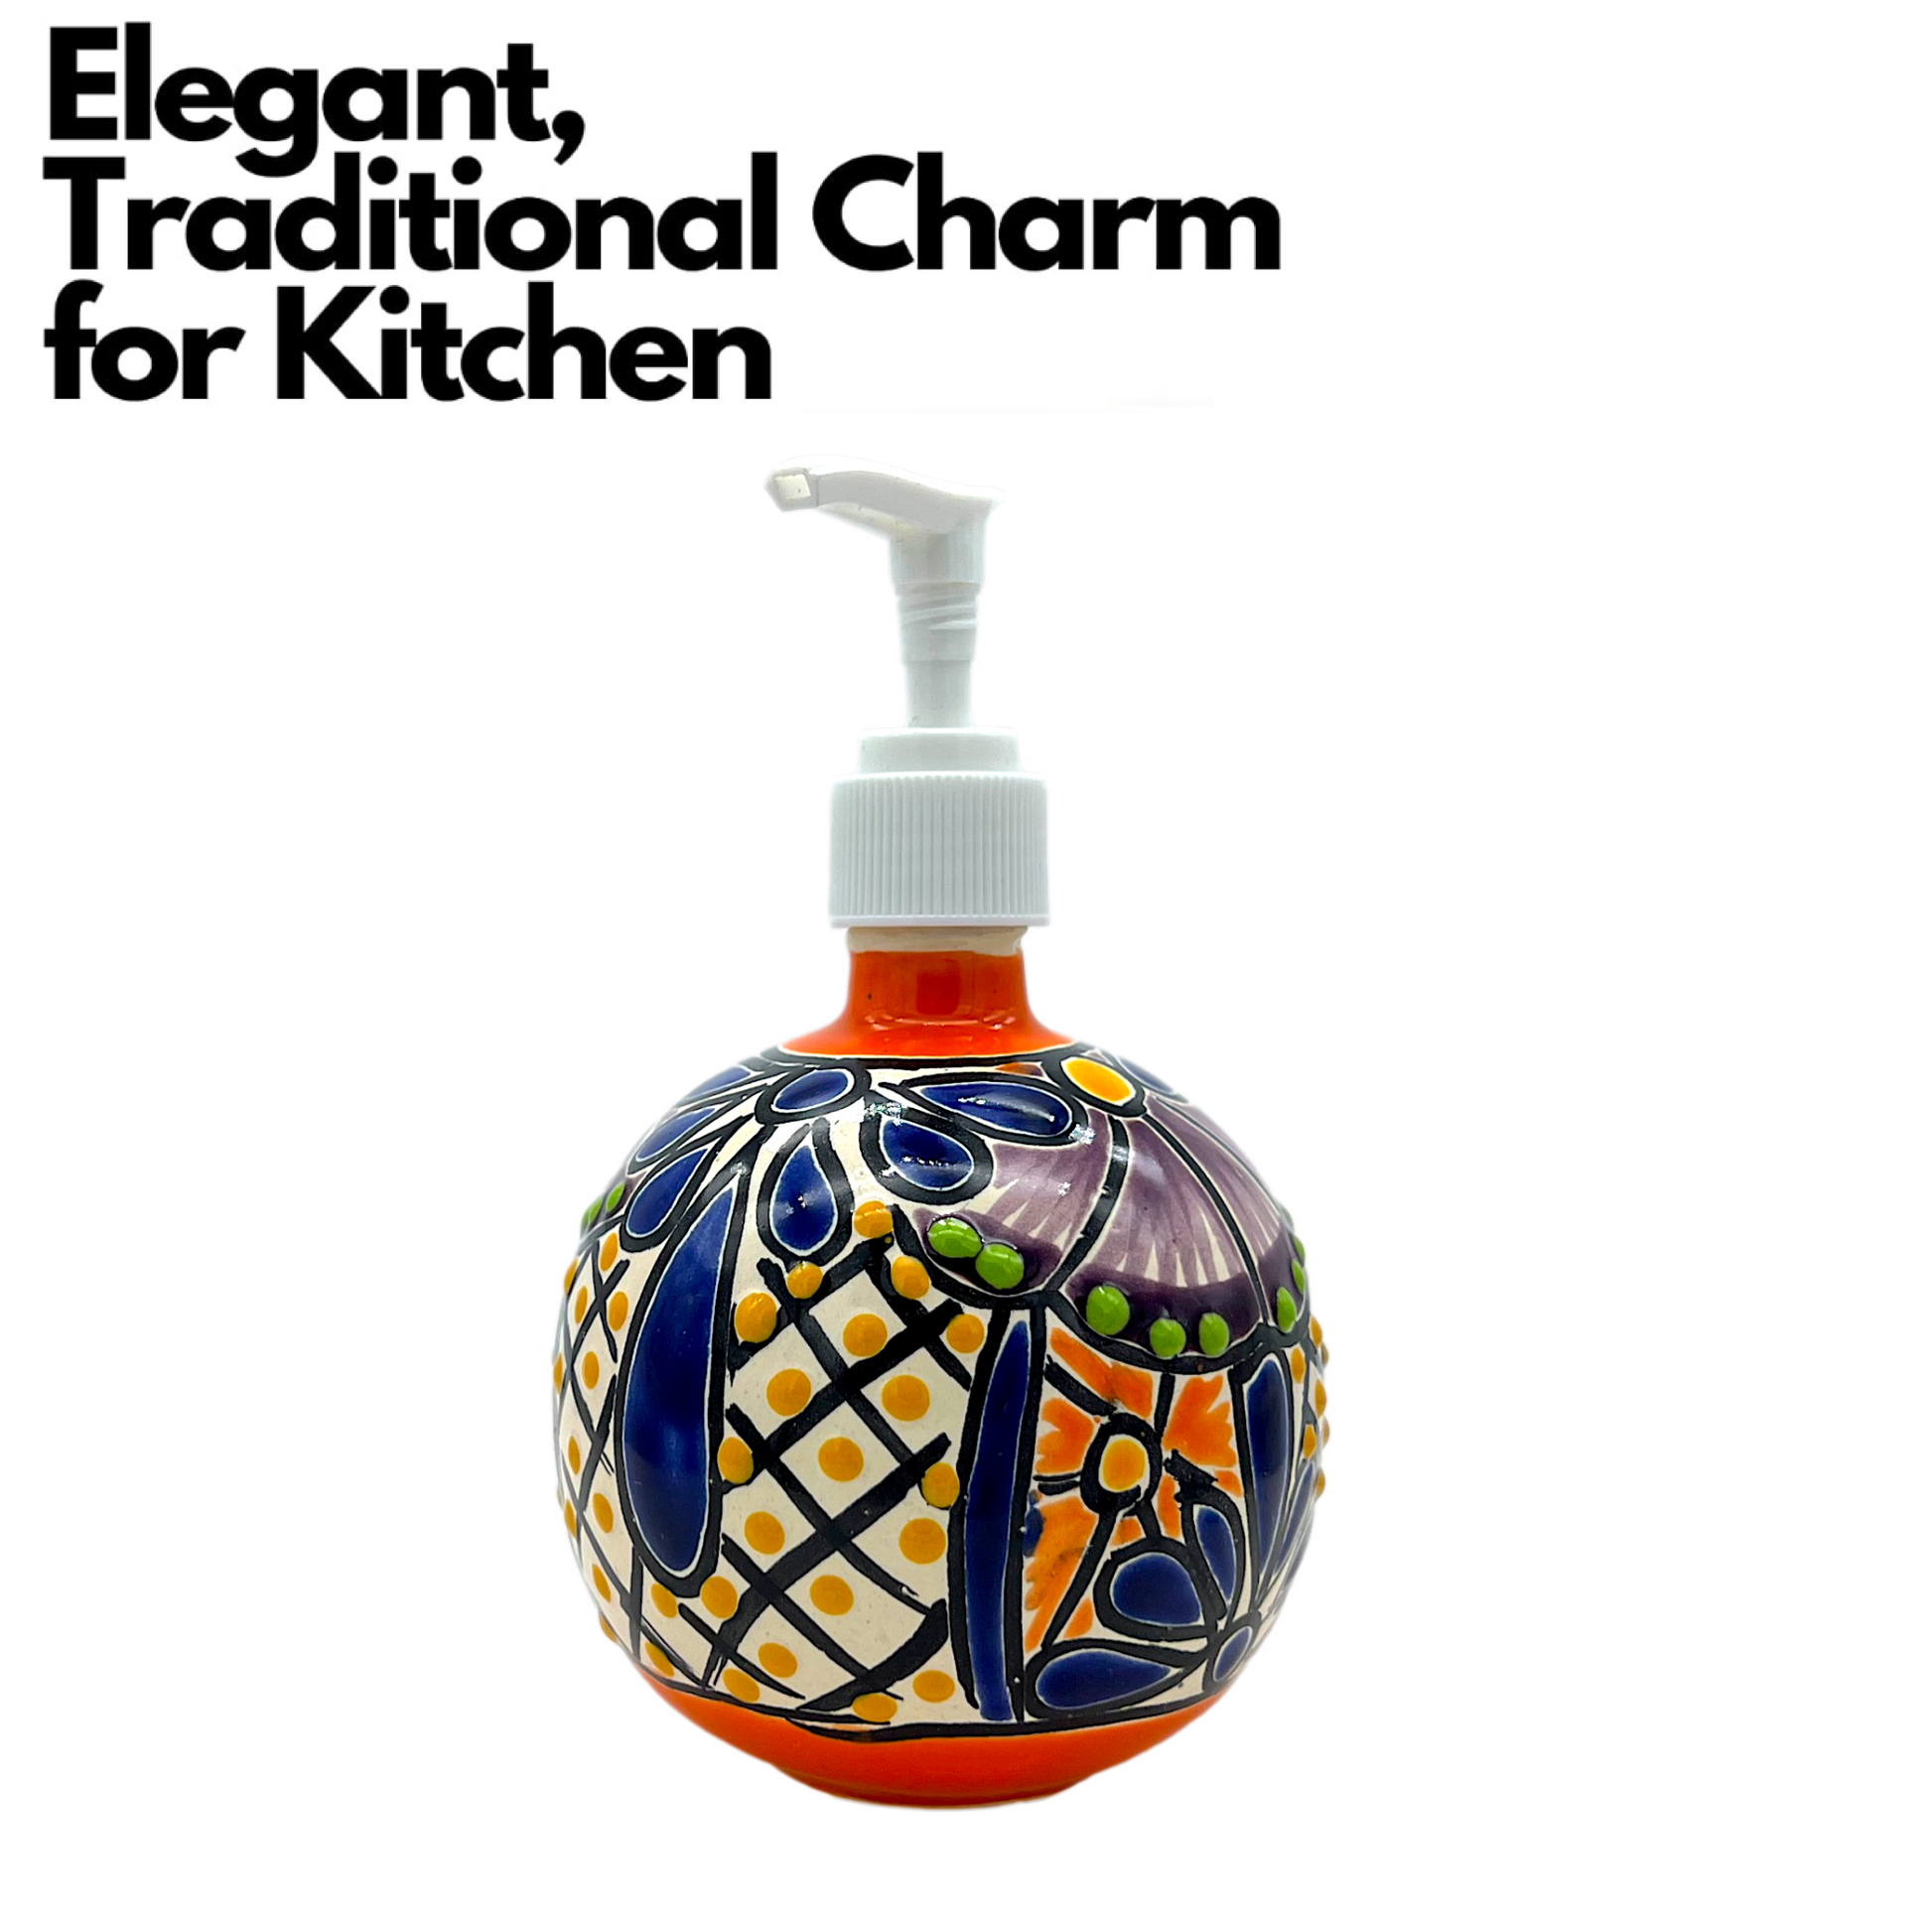 Hand-painted Talavera Ceramic Soap Dispenser in vibrant colors, an artistic addition to kitchen or bathroom. elegant traditional charm for kitchen